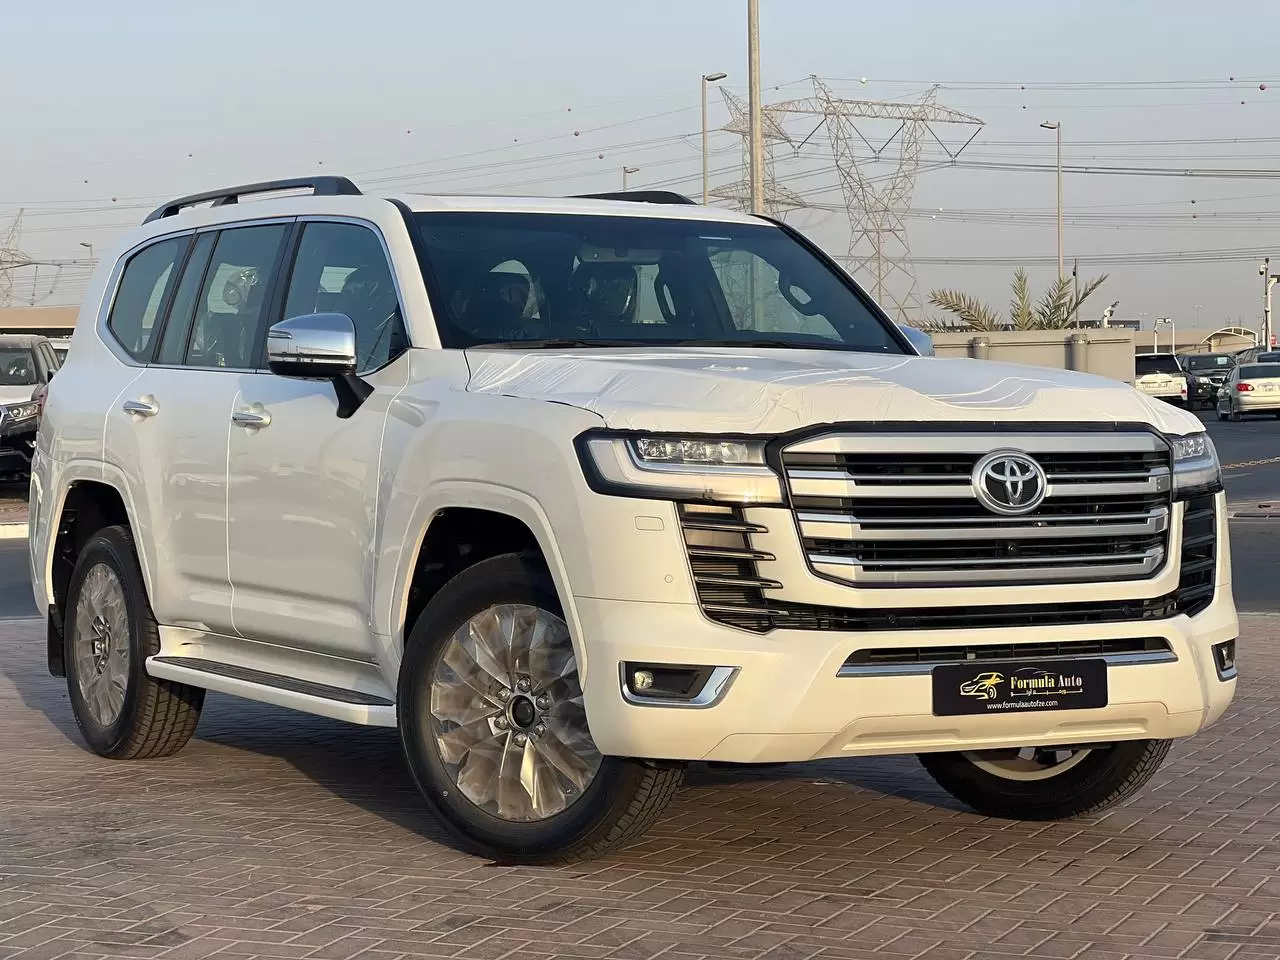 How to Buy Used Car in Dubai for Export